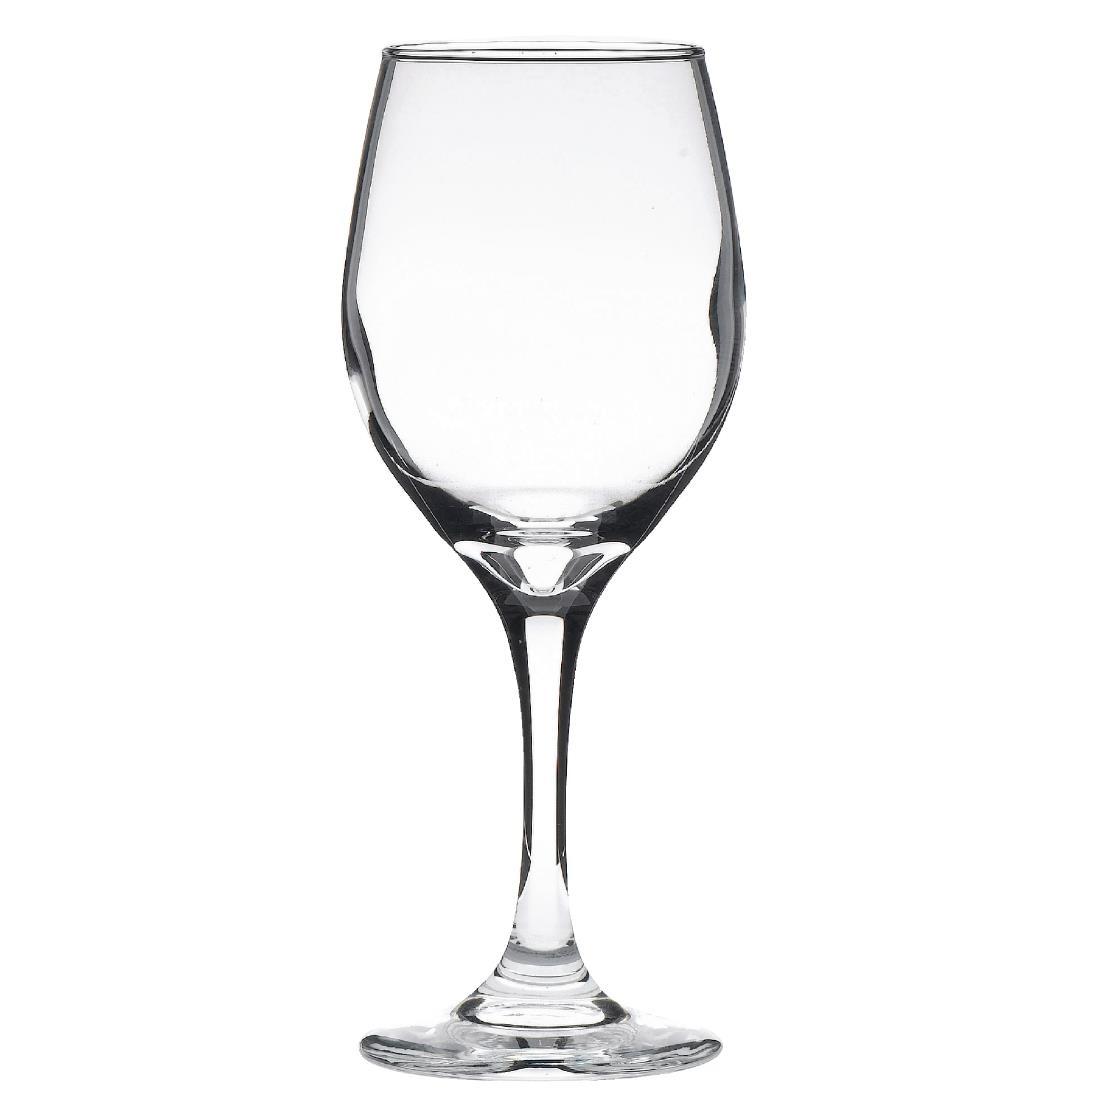 Libbey Perception Wine Glasses 320ml CE Marked at 250ml (Pack of 12) - CT529  - 1